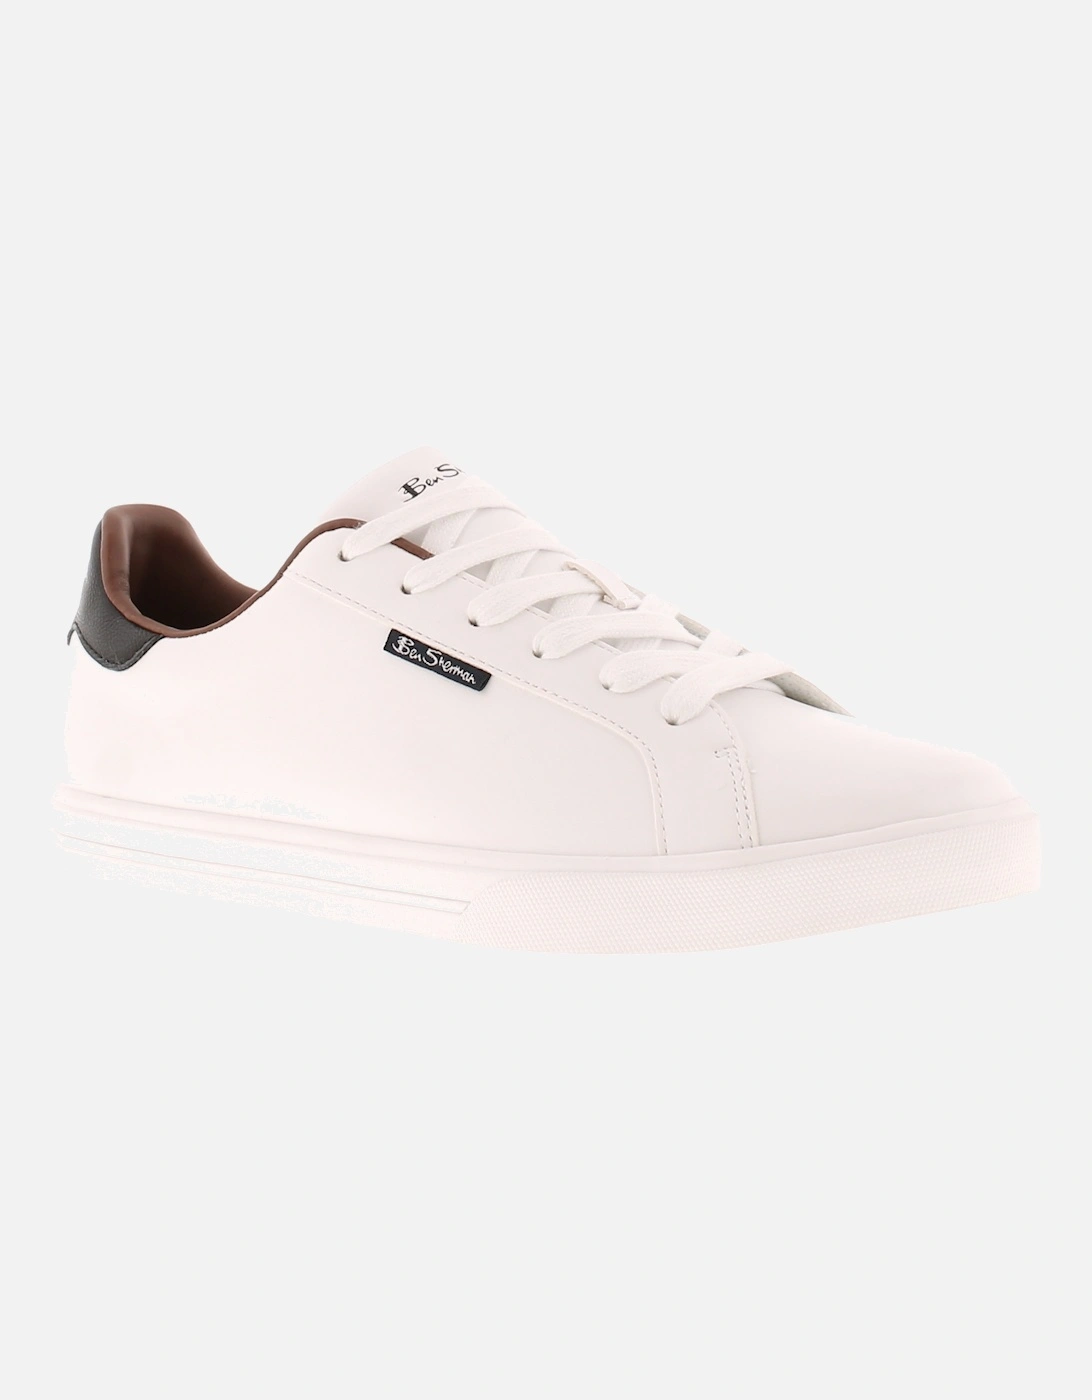 Mens Shoes Casual Chase white UK Size, 6 of 5